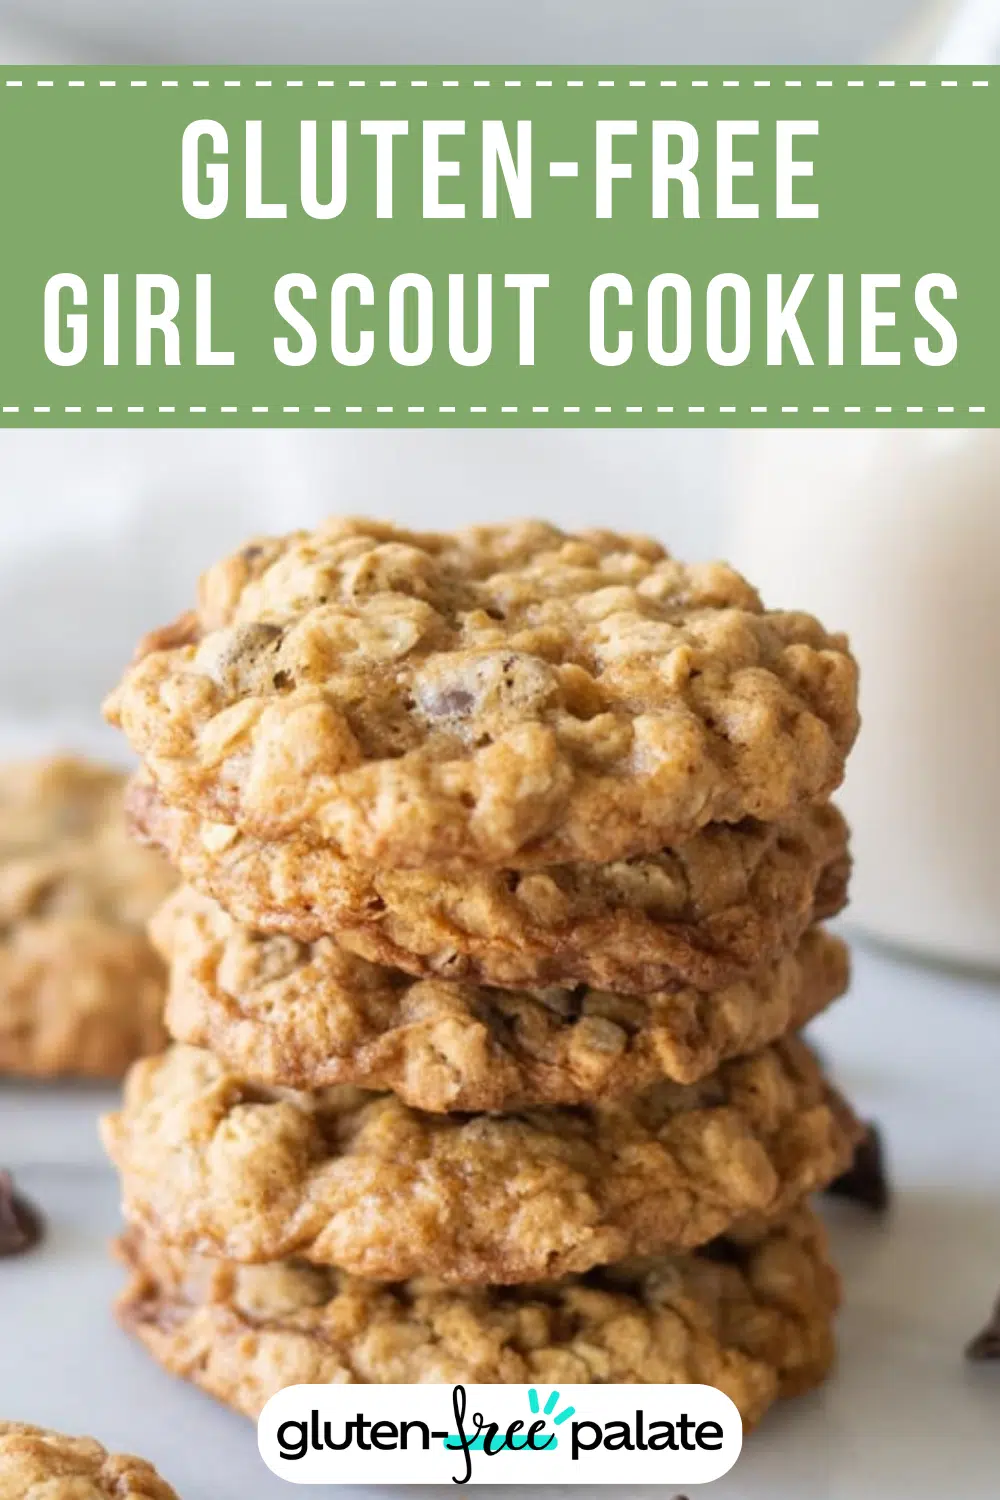 gluten-free girl scout cookies